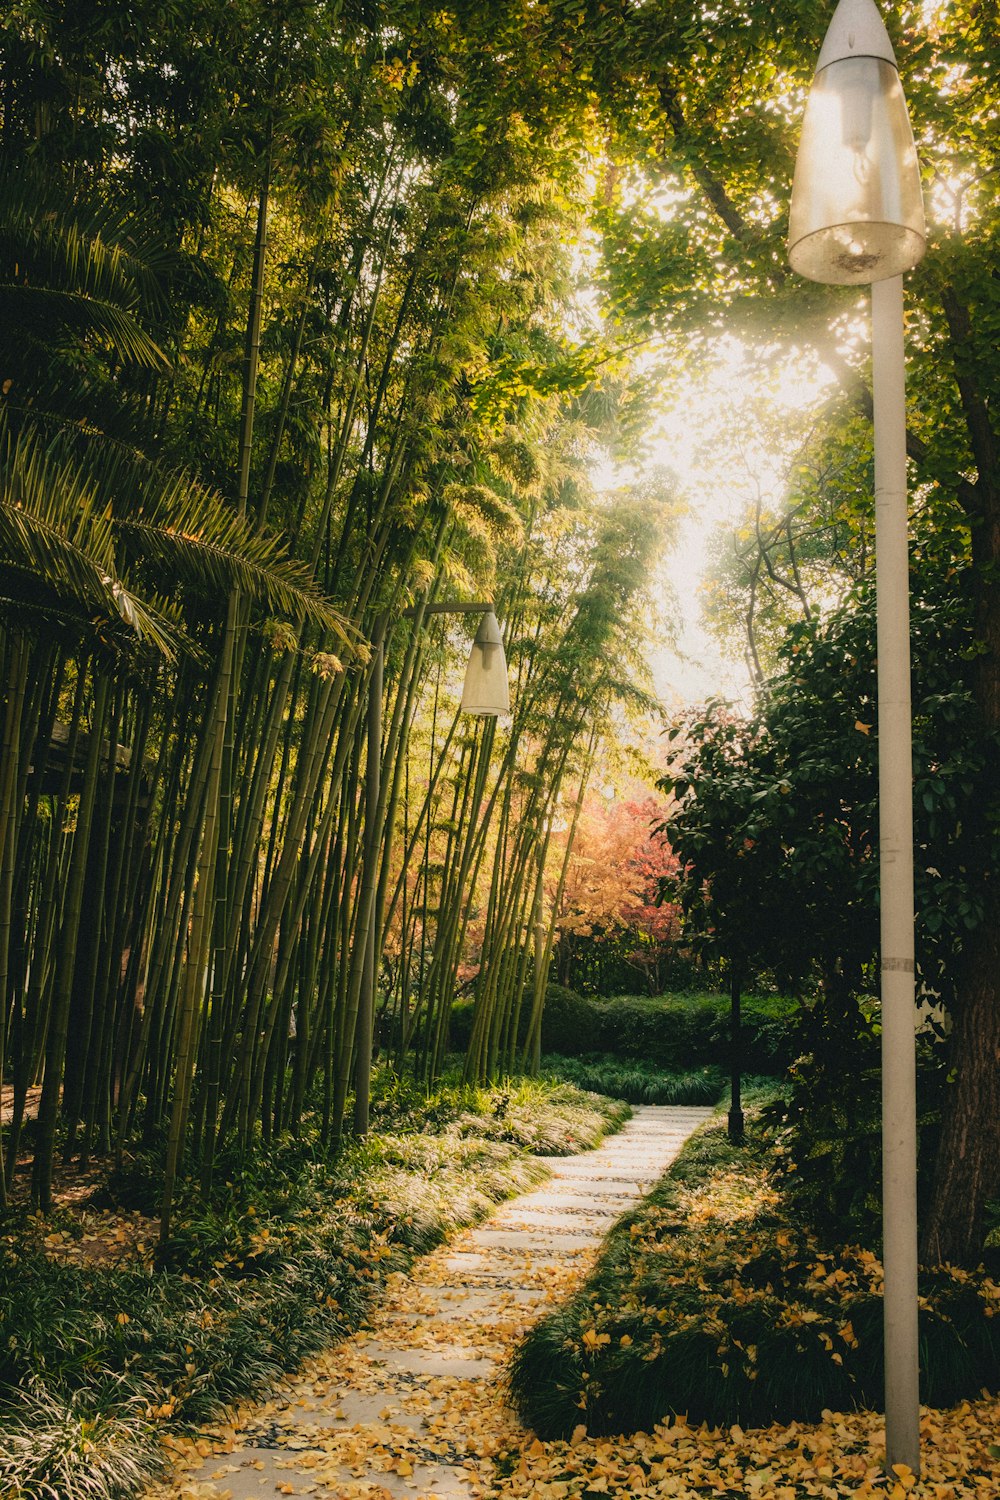 a path through a lush green forest next to a tall bamboo tree